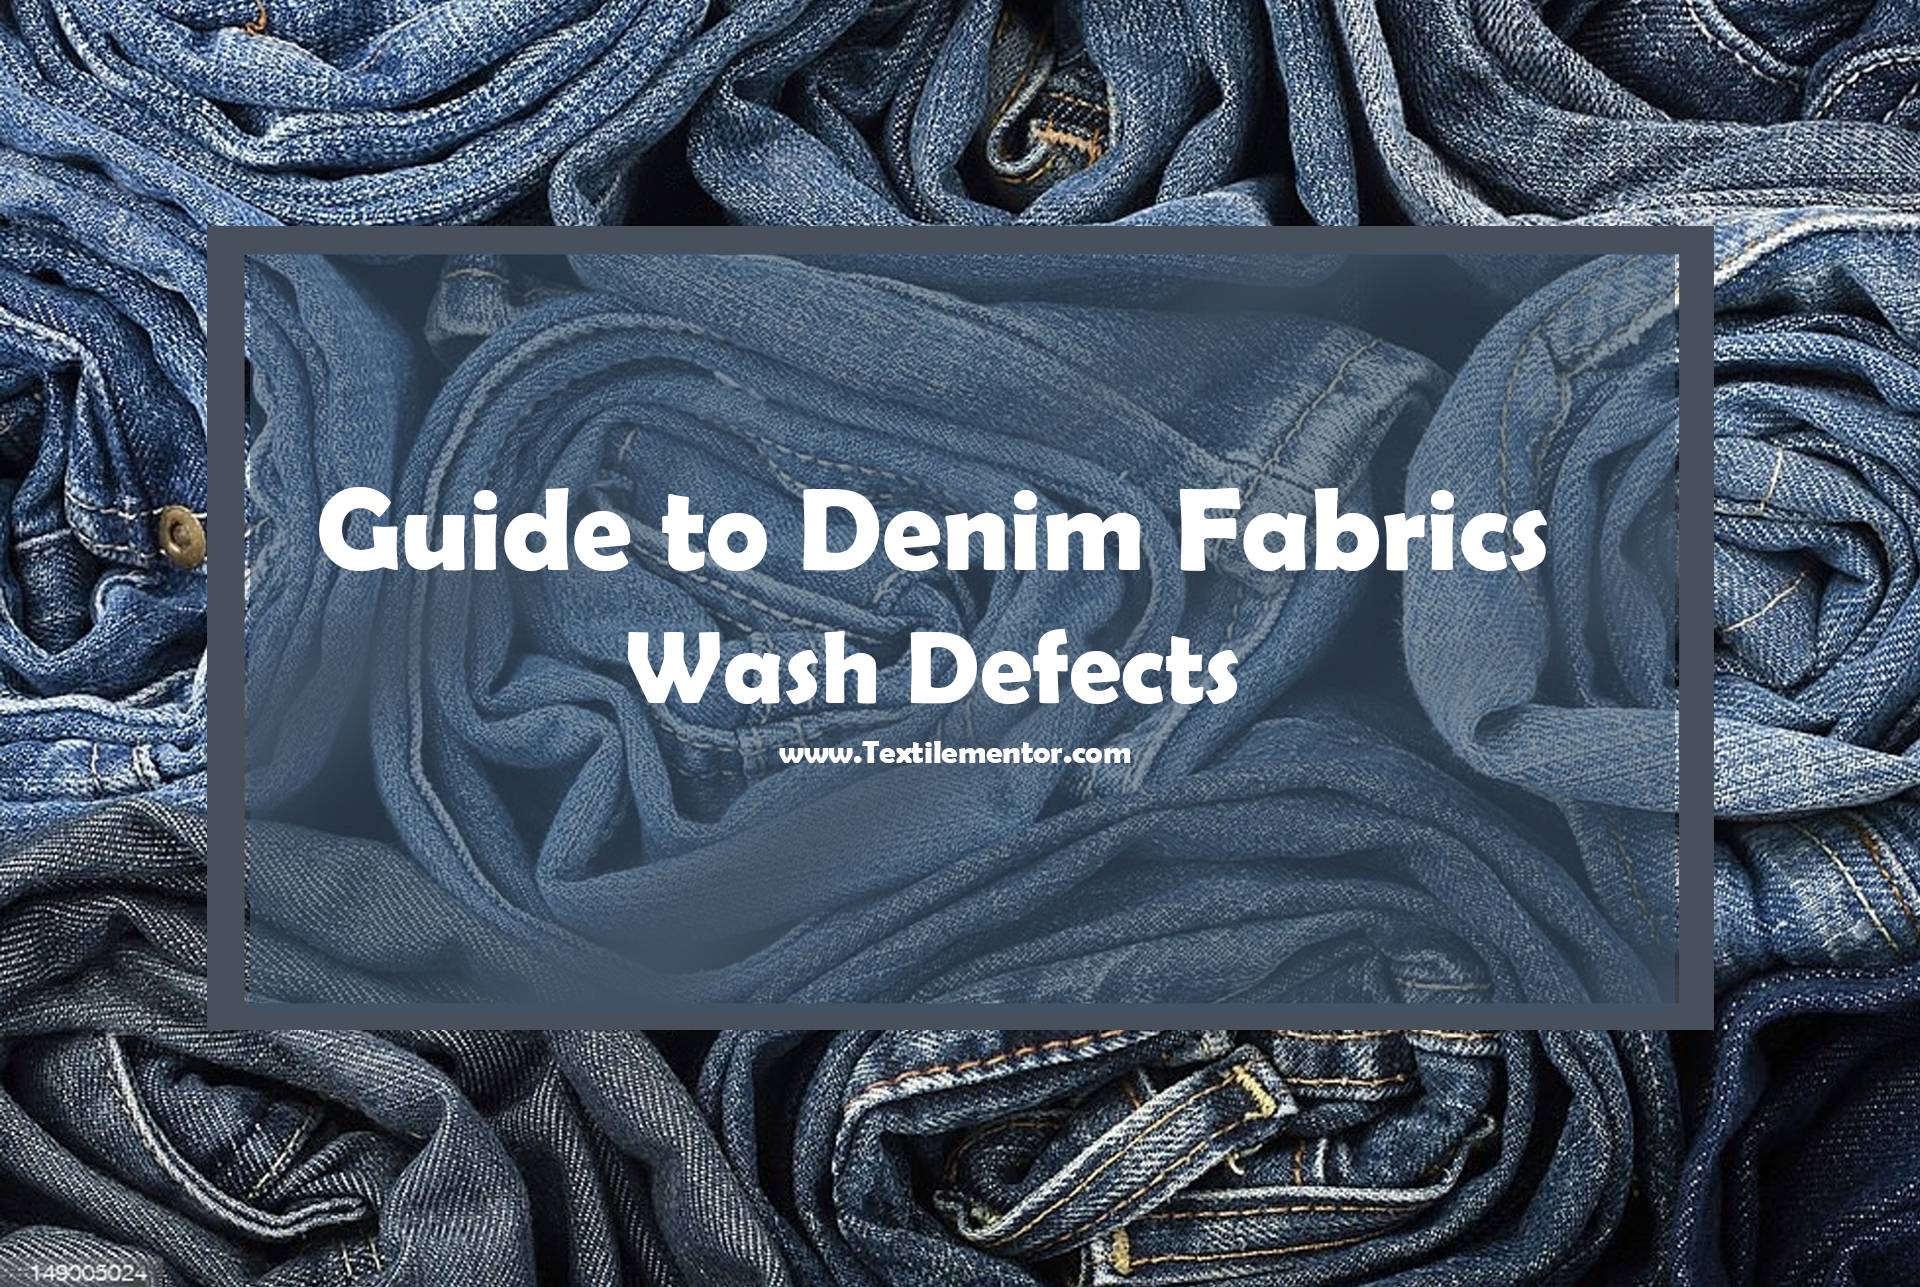 A Guide To Denim Fabrics And How To Prevent Wash Defects